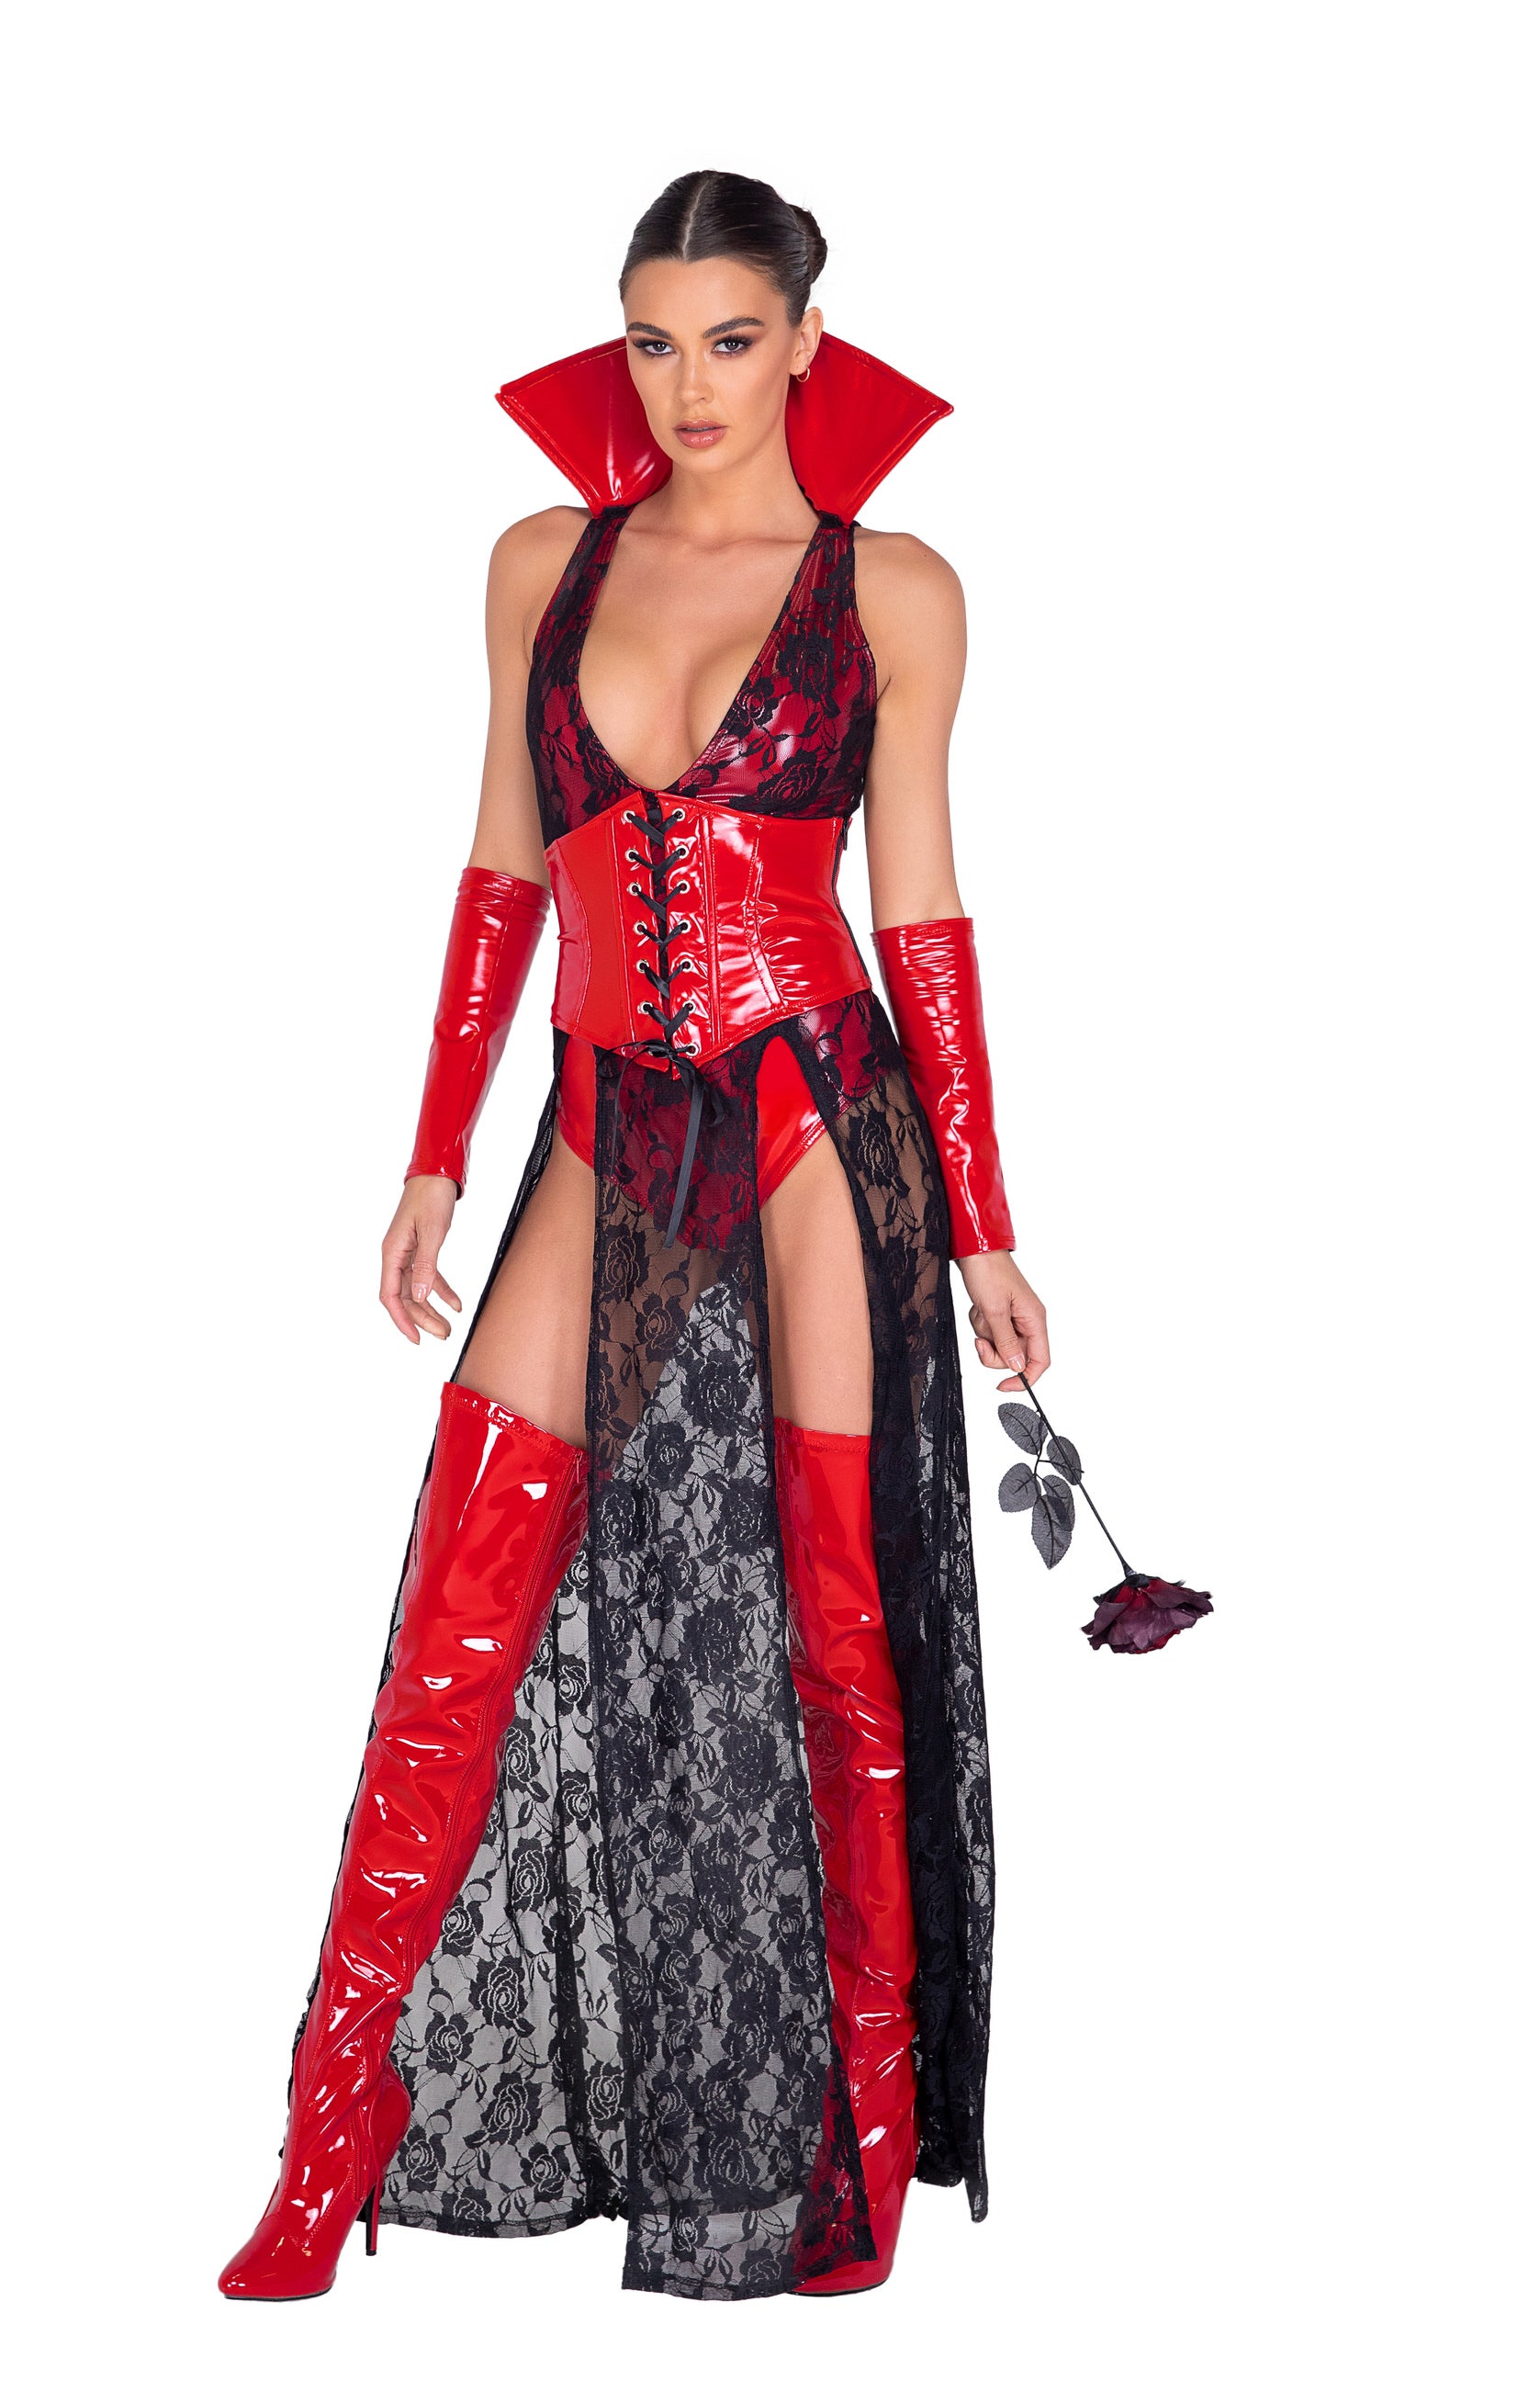 Wicked Vampire Costume by ROMA in Size S, M, or L